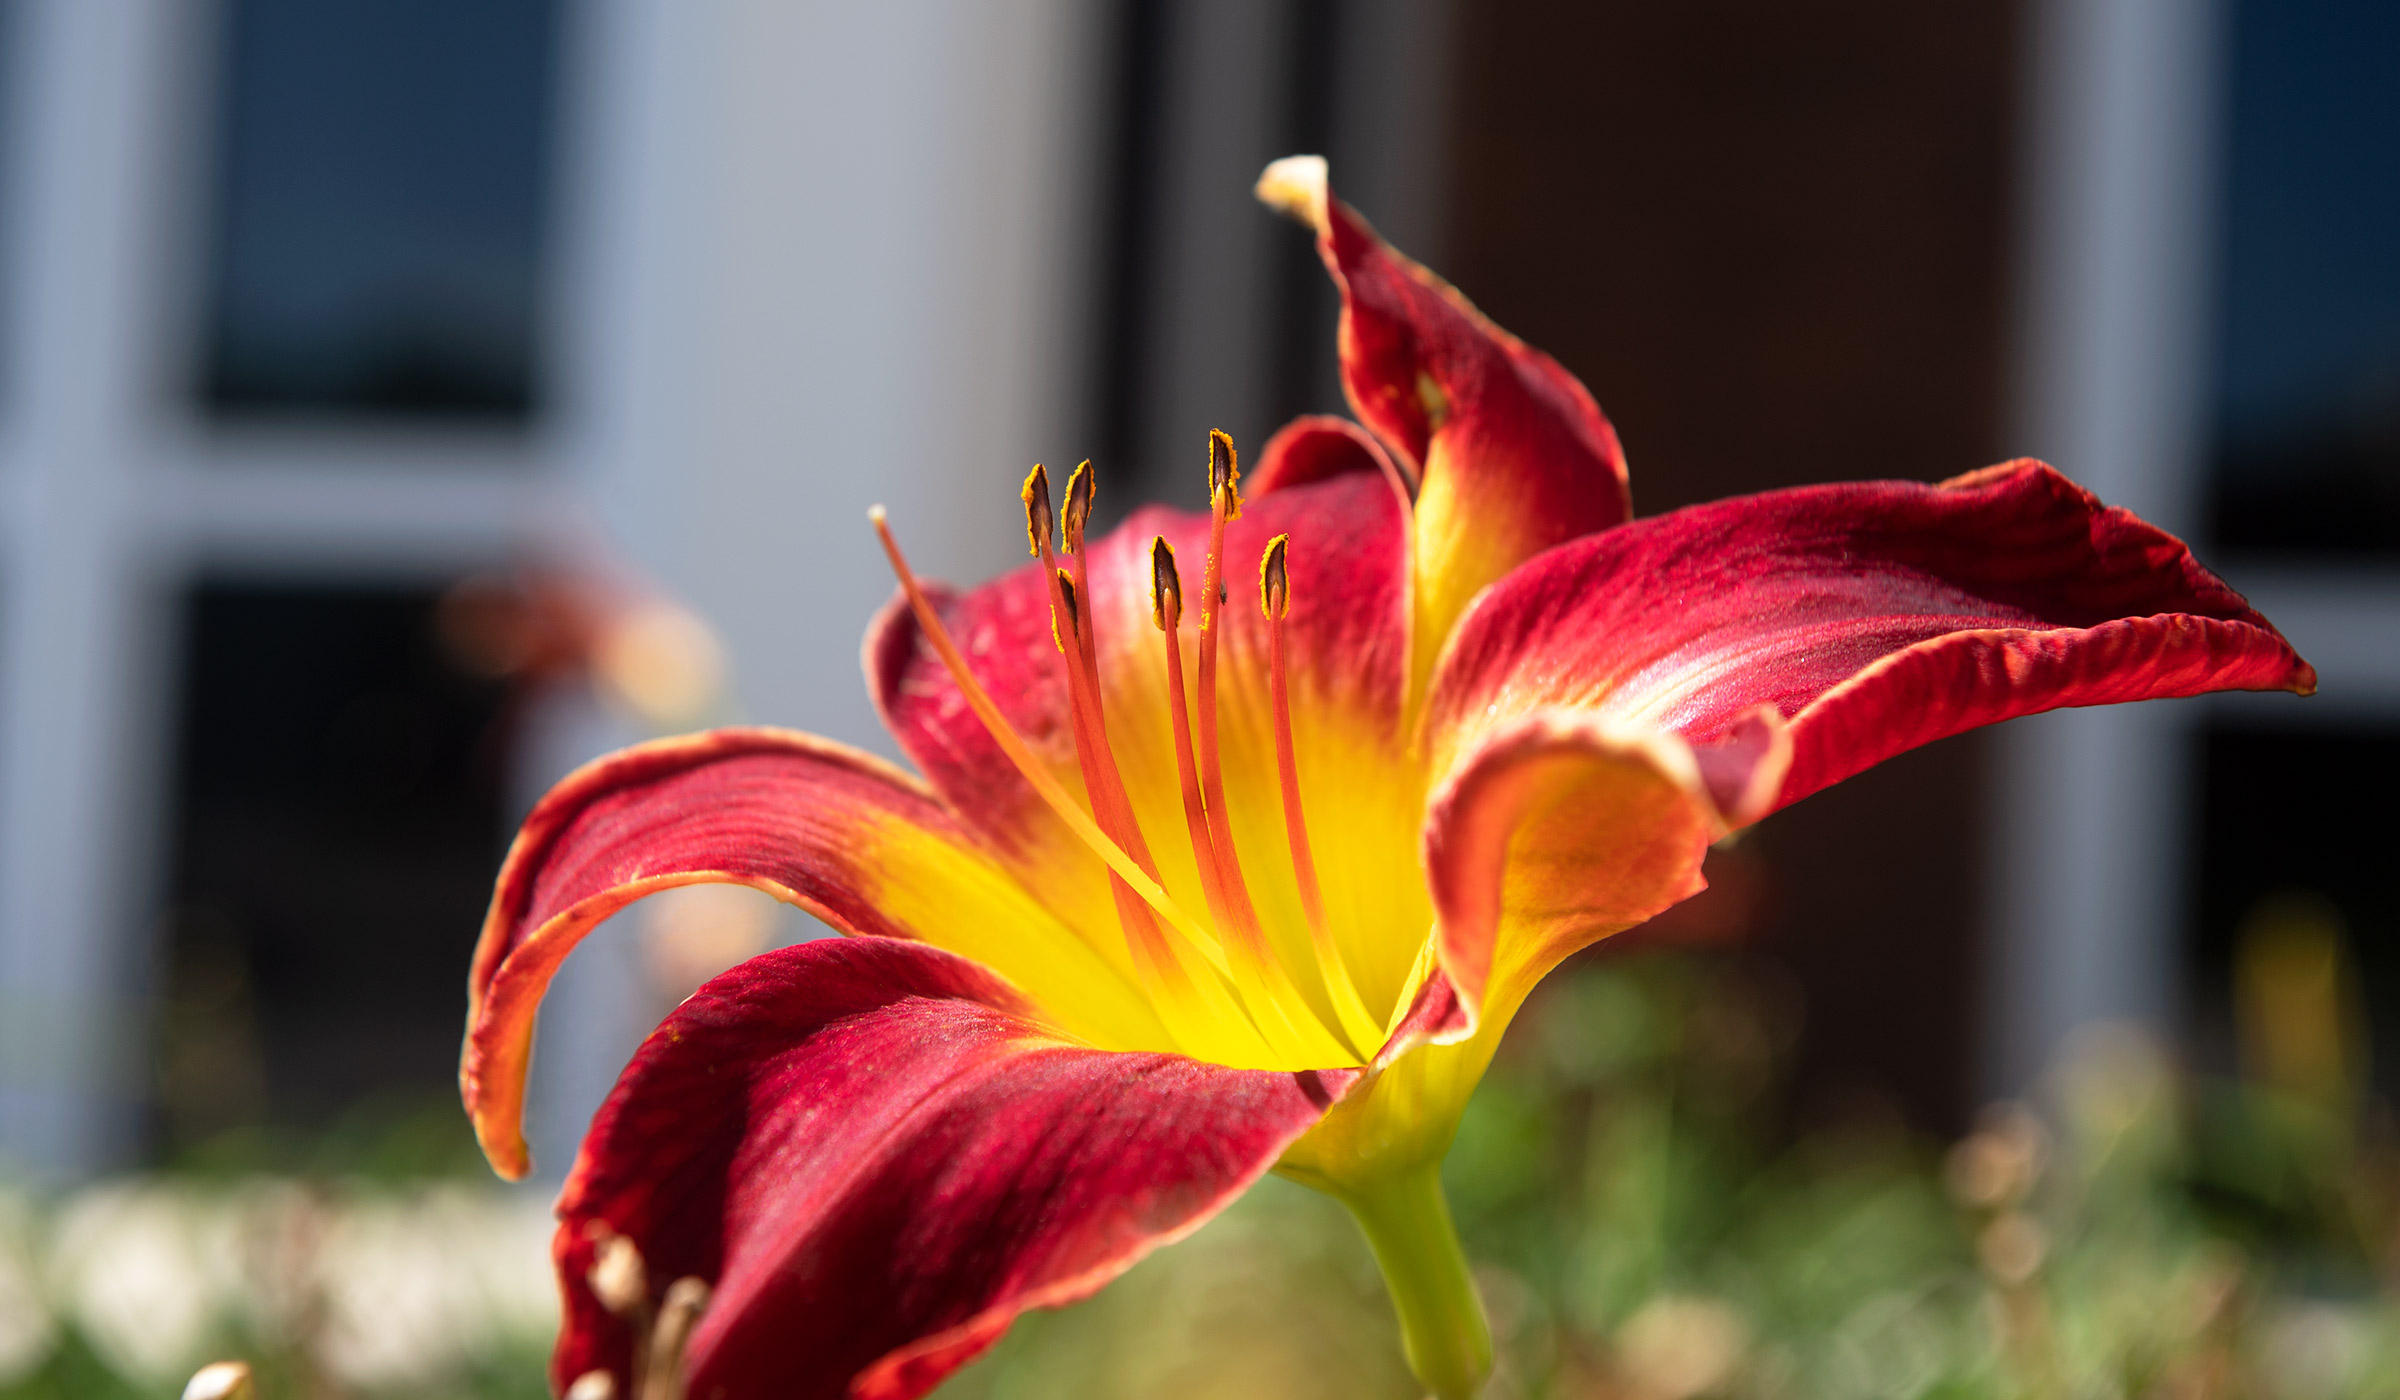 Maroon and yellow day lily in bloom